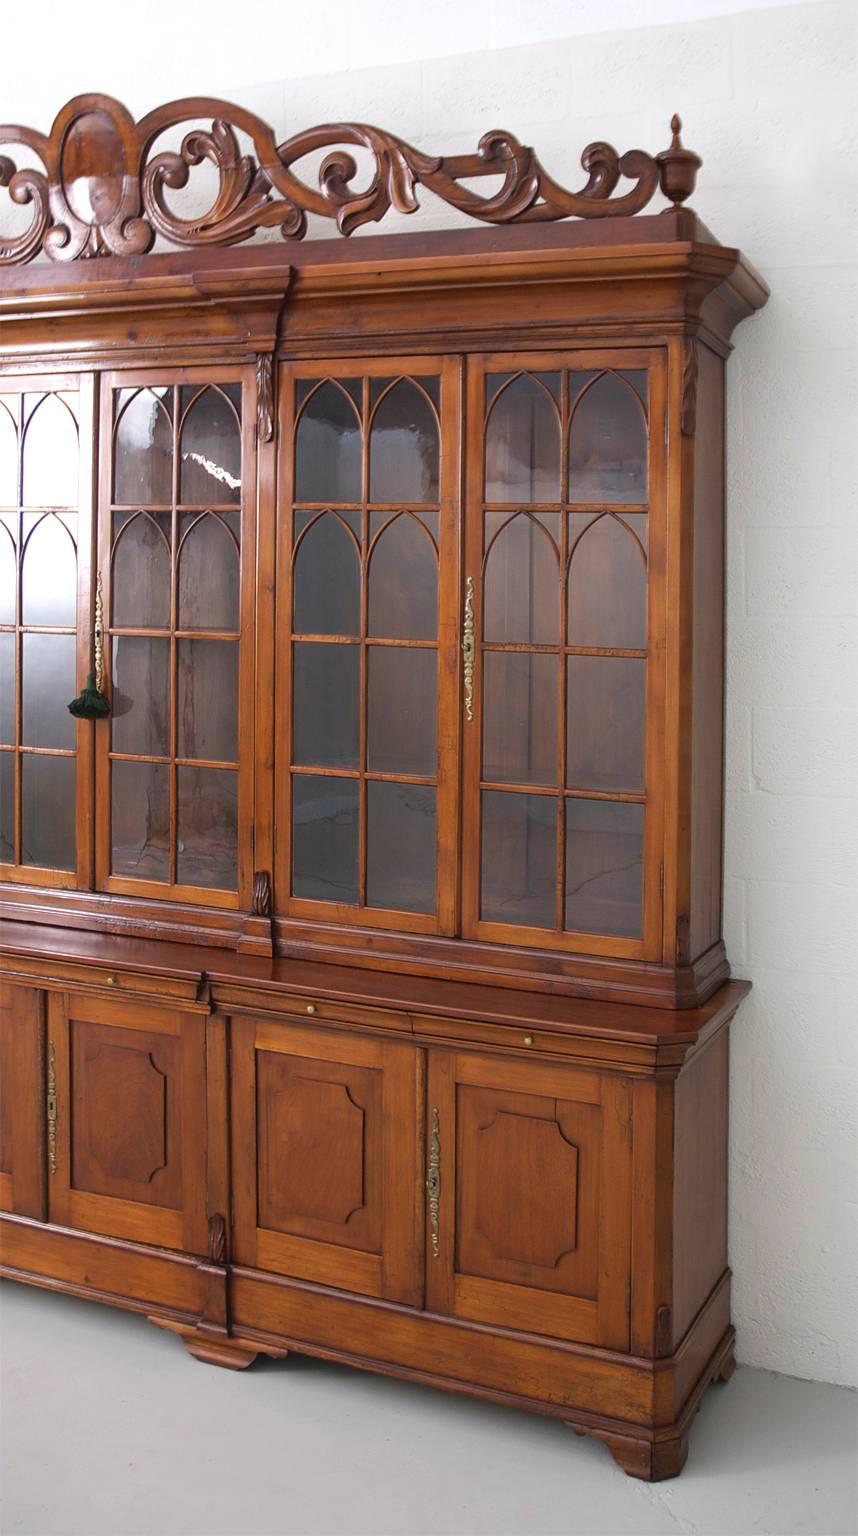 A monumental Louis Philippe breakfront bookcase, bibliotheque, measuring over 10 1/2 feet in length, in sycamore with original glass panes featuring arched mullions on upper cabinet, raised wooden panels on lower cabinet, and six exterior drawers in